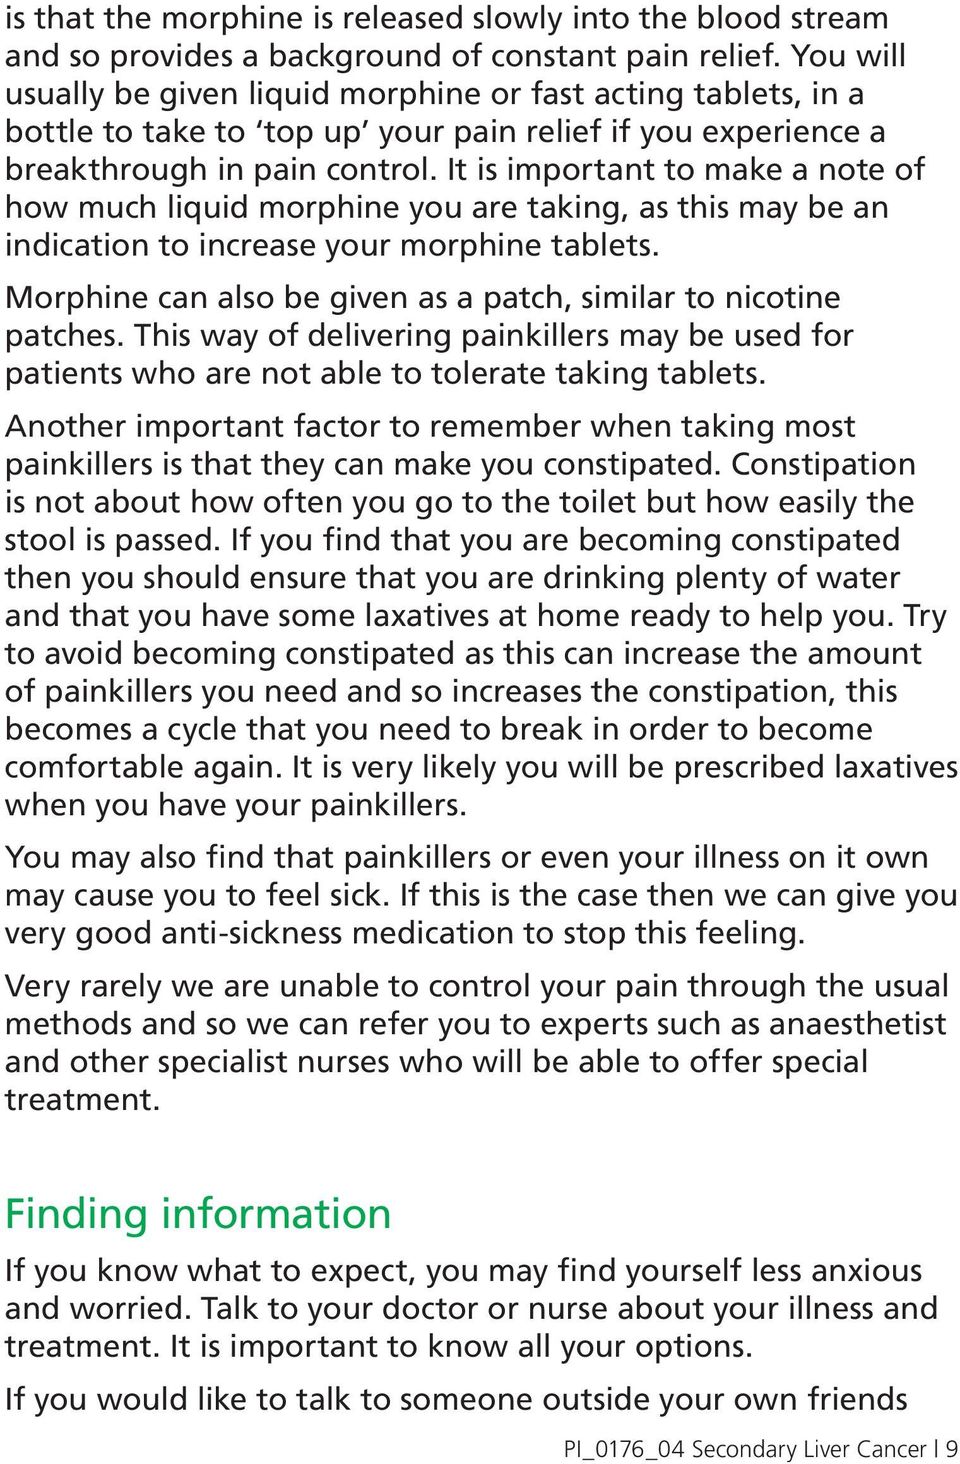 It is important to make a note of how much liquid morphine you are taking, as this may be an indication to increase your morphine tablets.